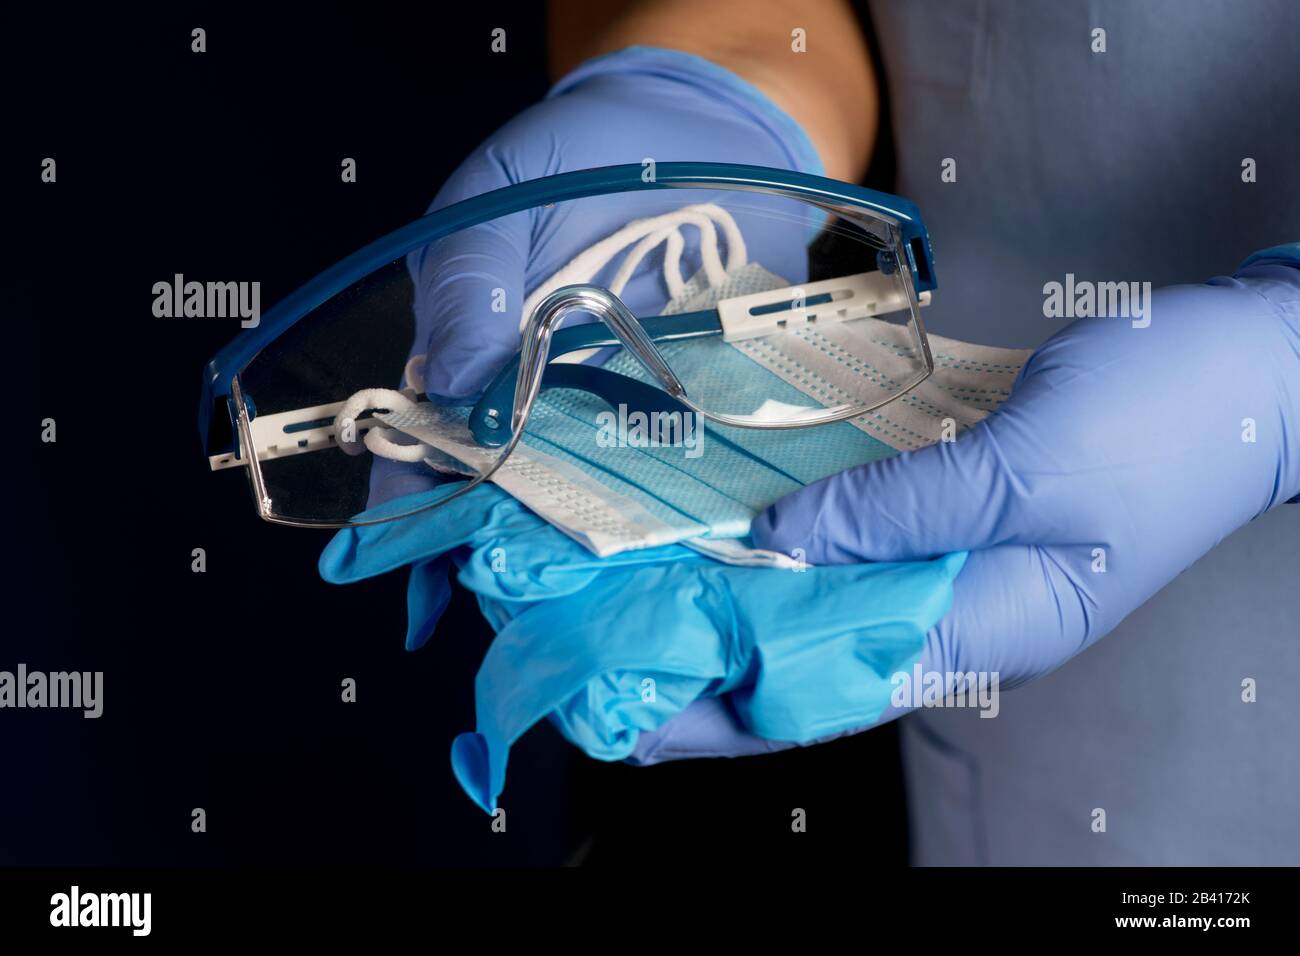 Nurse offers personal protection equipment; gloves, masks, and safety glasses. Stock Photo